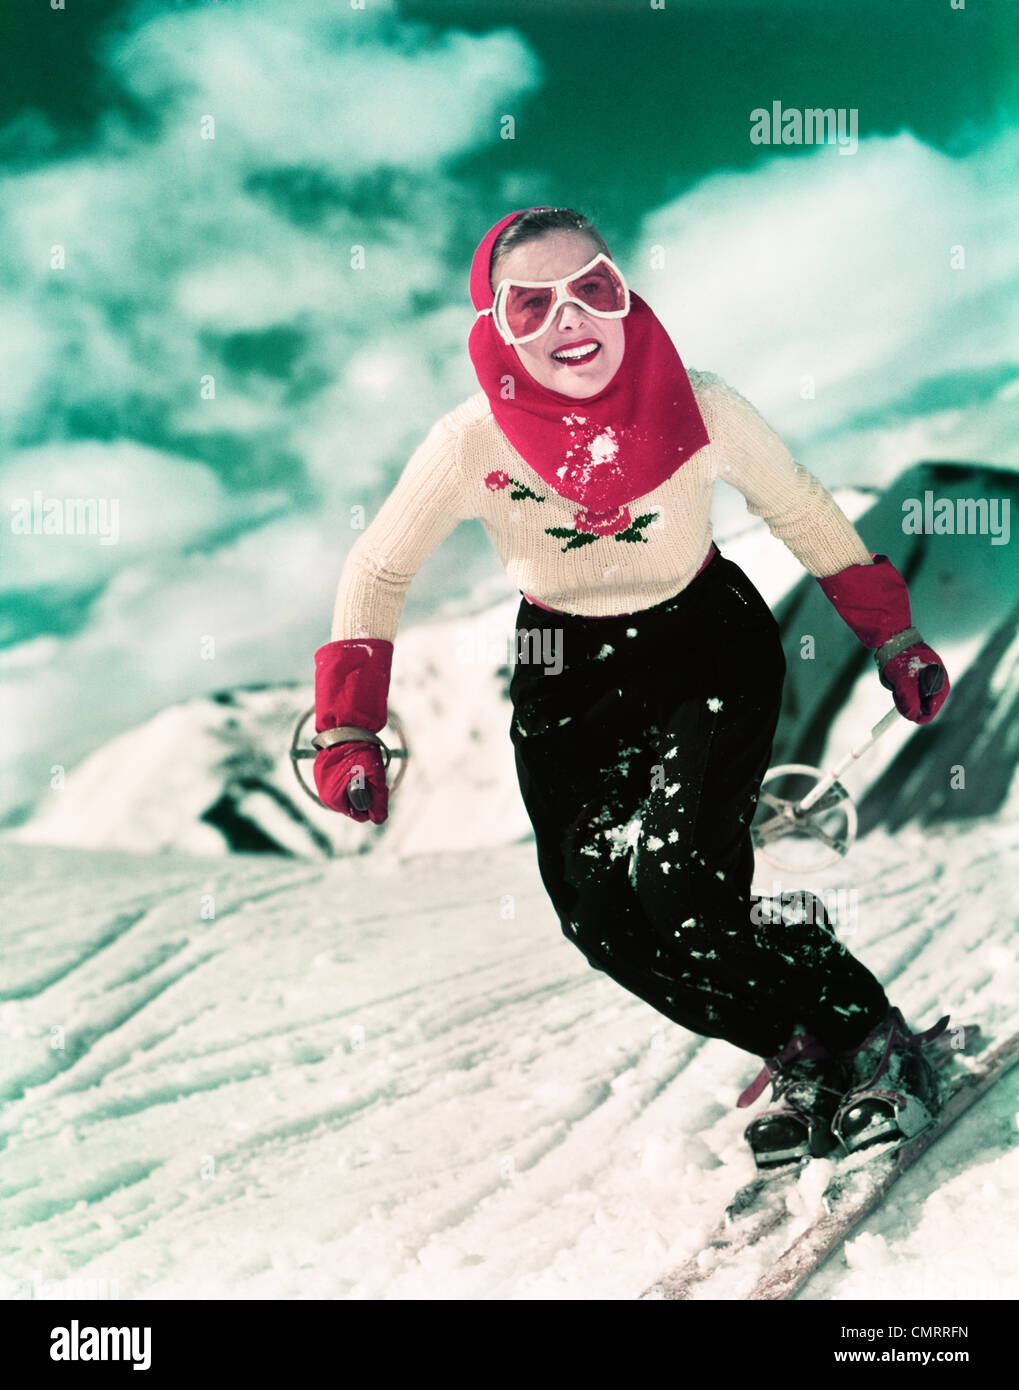 1940s 1950s SMILING WOMAN SKIING DOWNHILL WEARING GOGGLES RED HOOD AND RED GLOVES Stock Photo